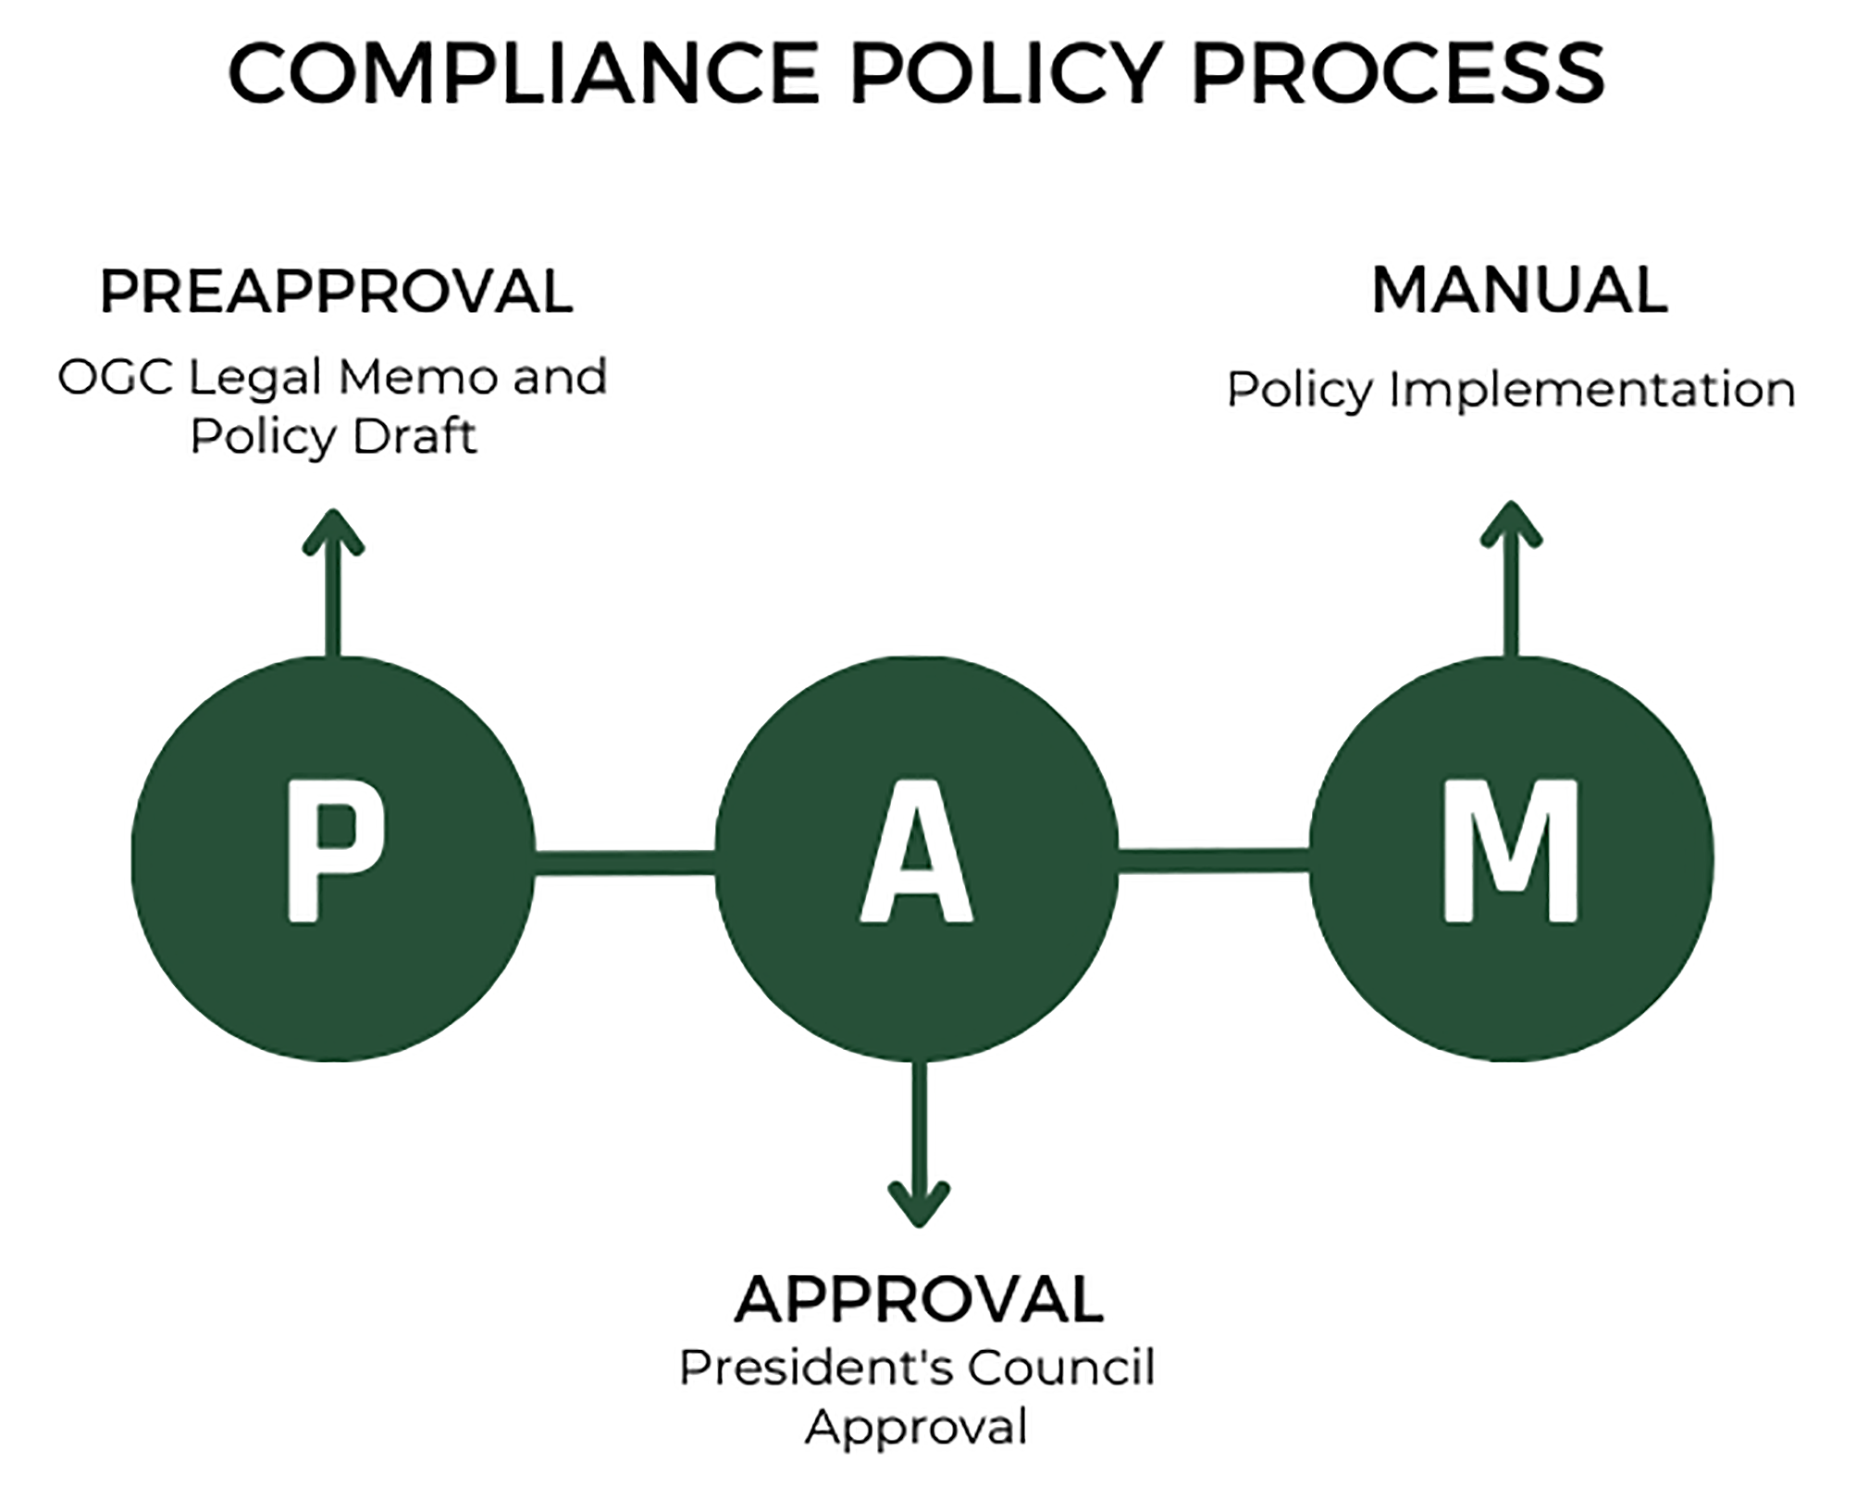 A graphic overviewing the compliance process. The steps include preapproval, approval, and policy manual implementation.